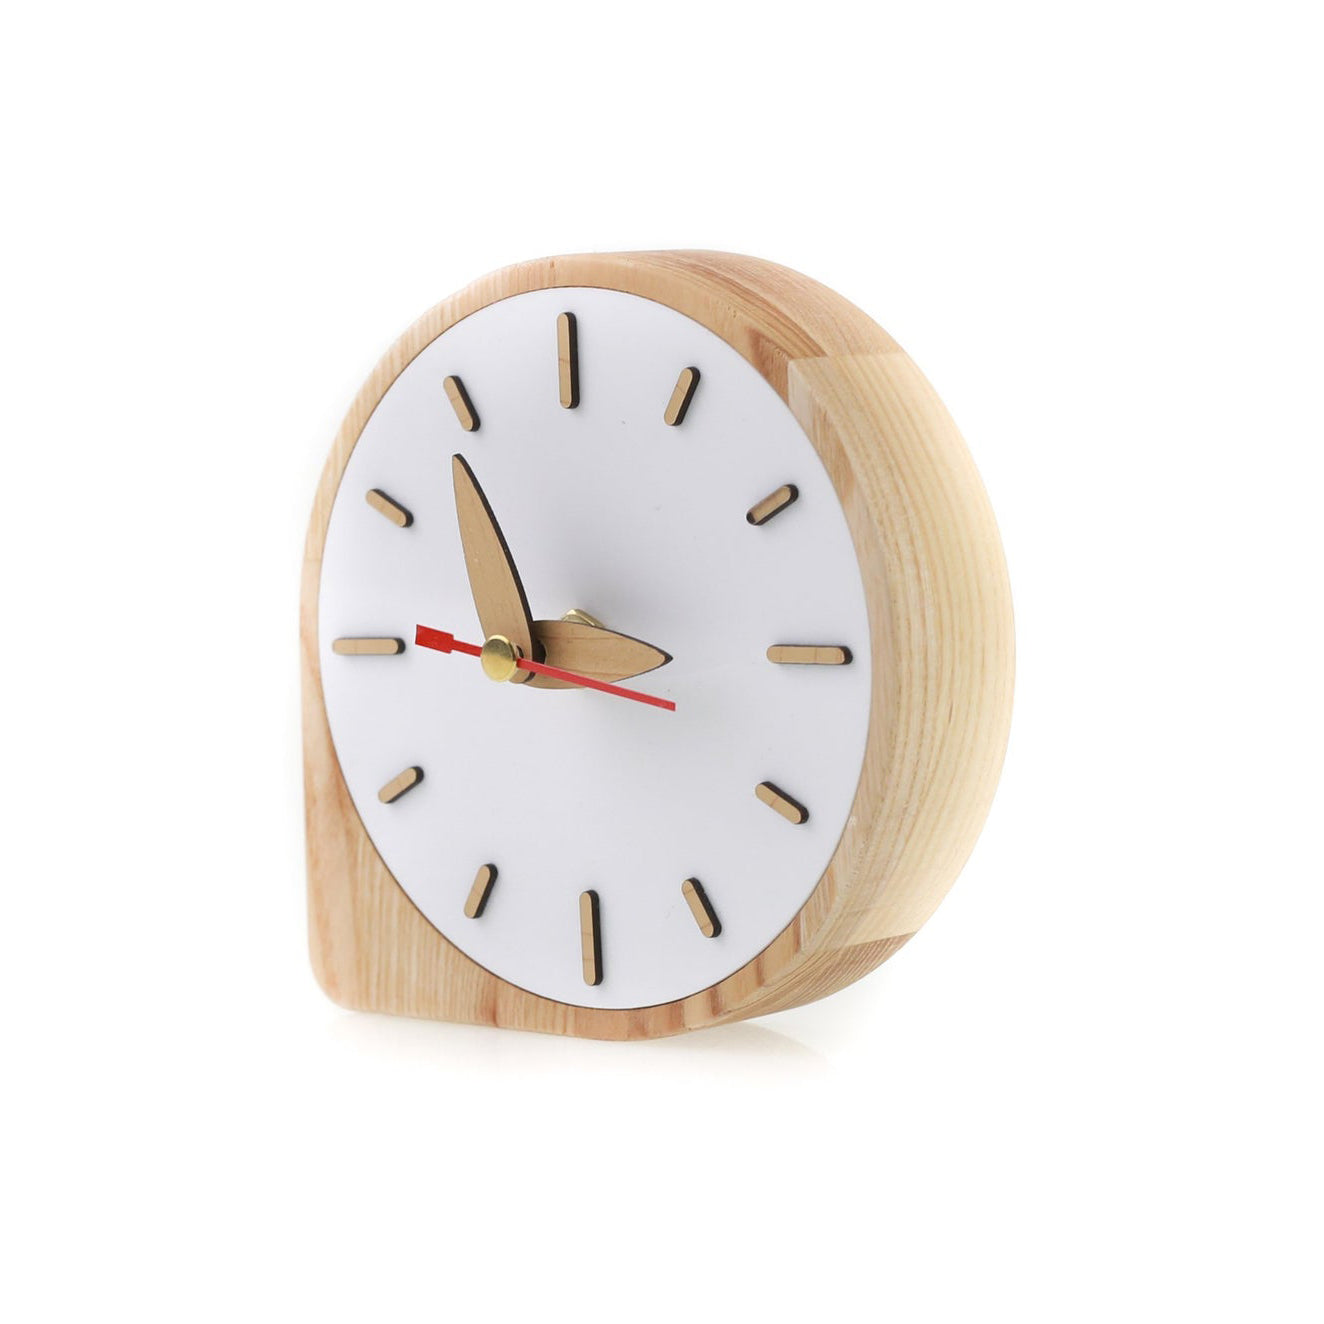 wooden promo desk clock with white face on white background